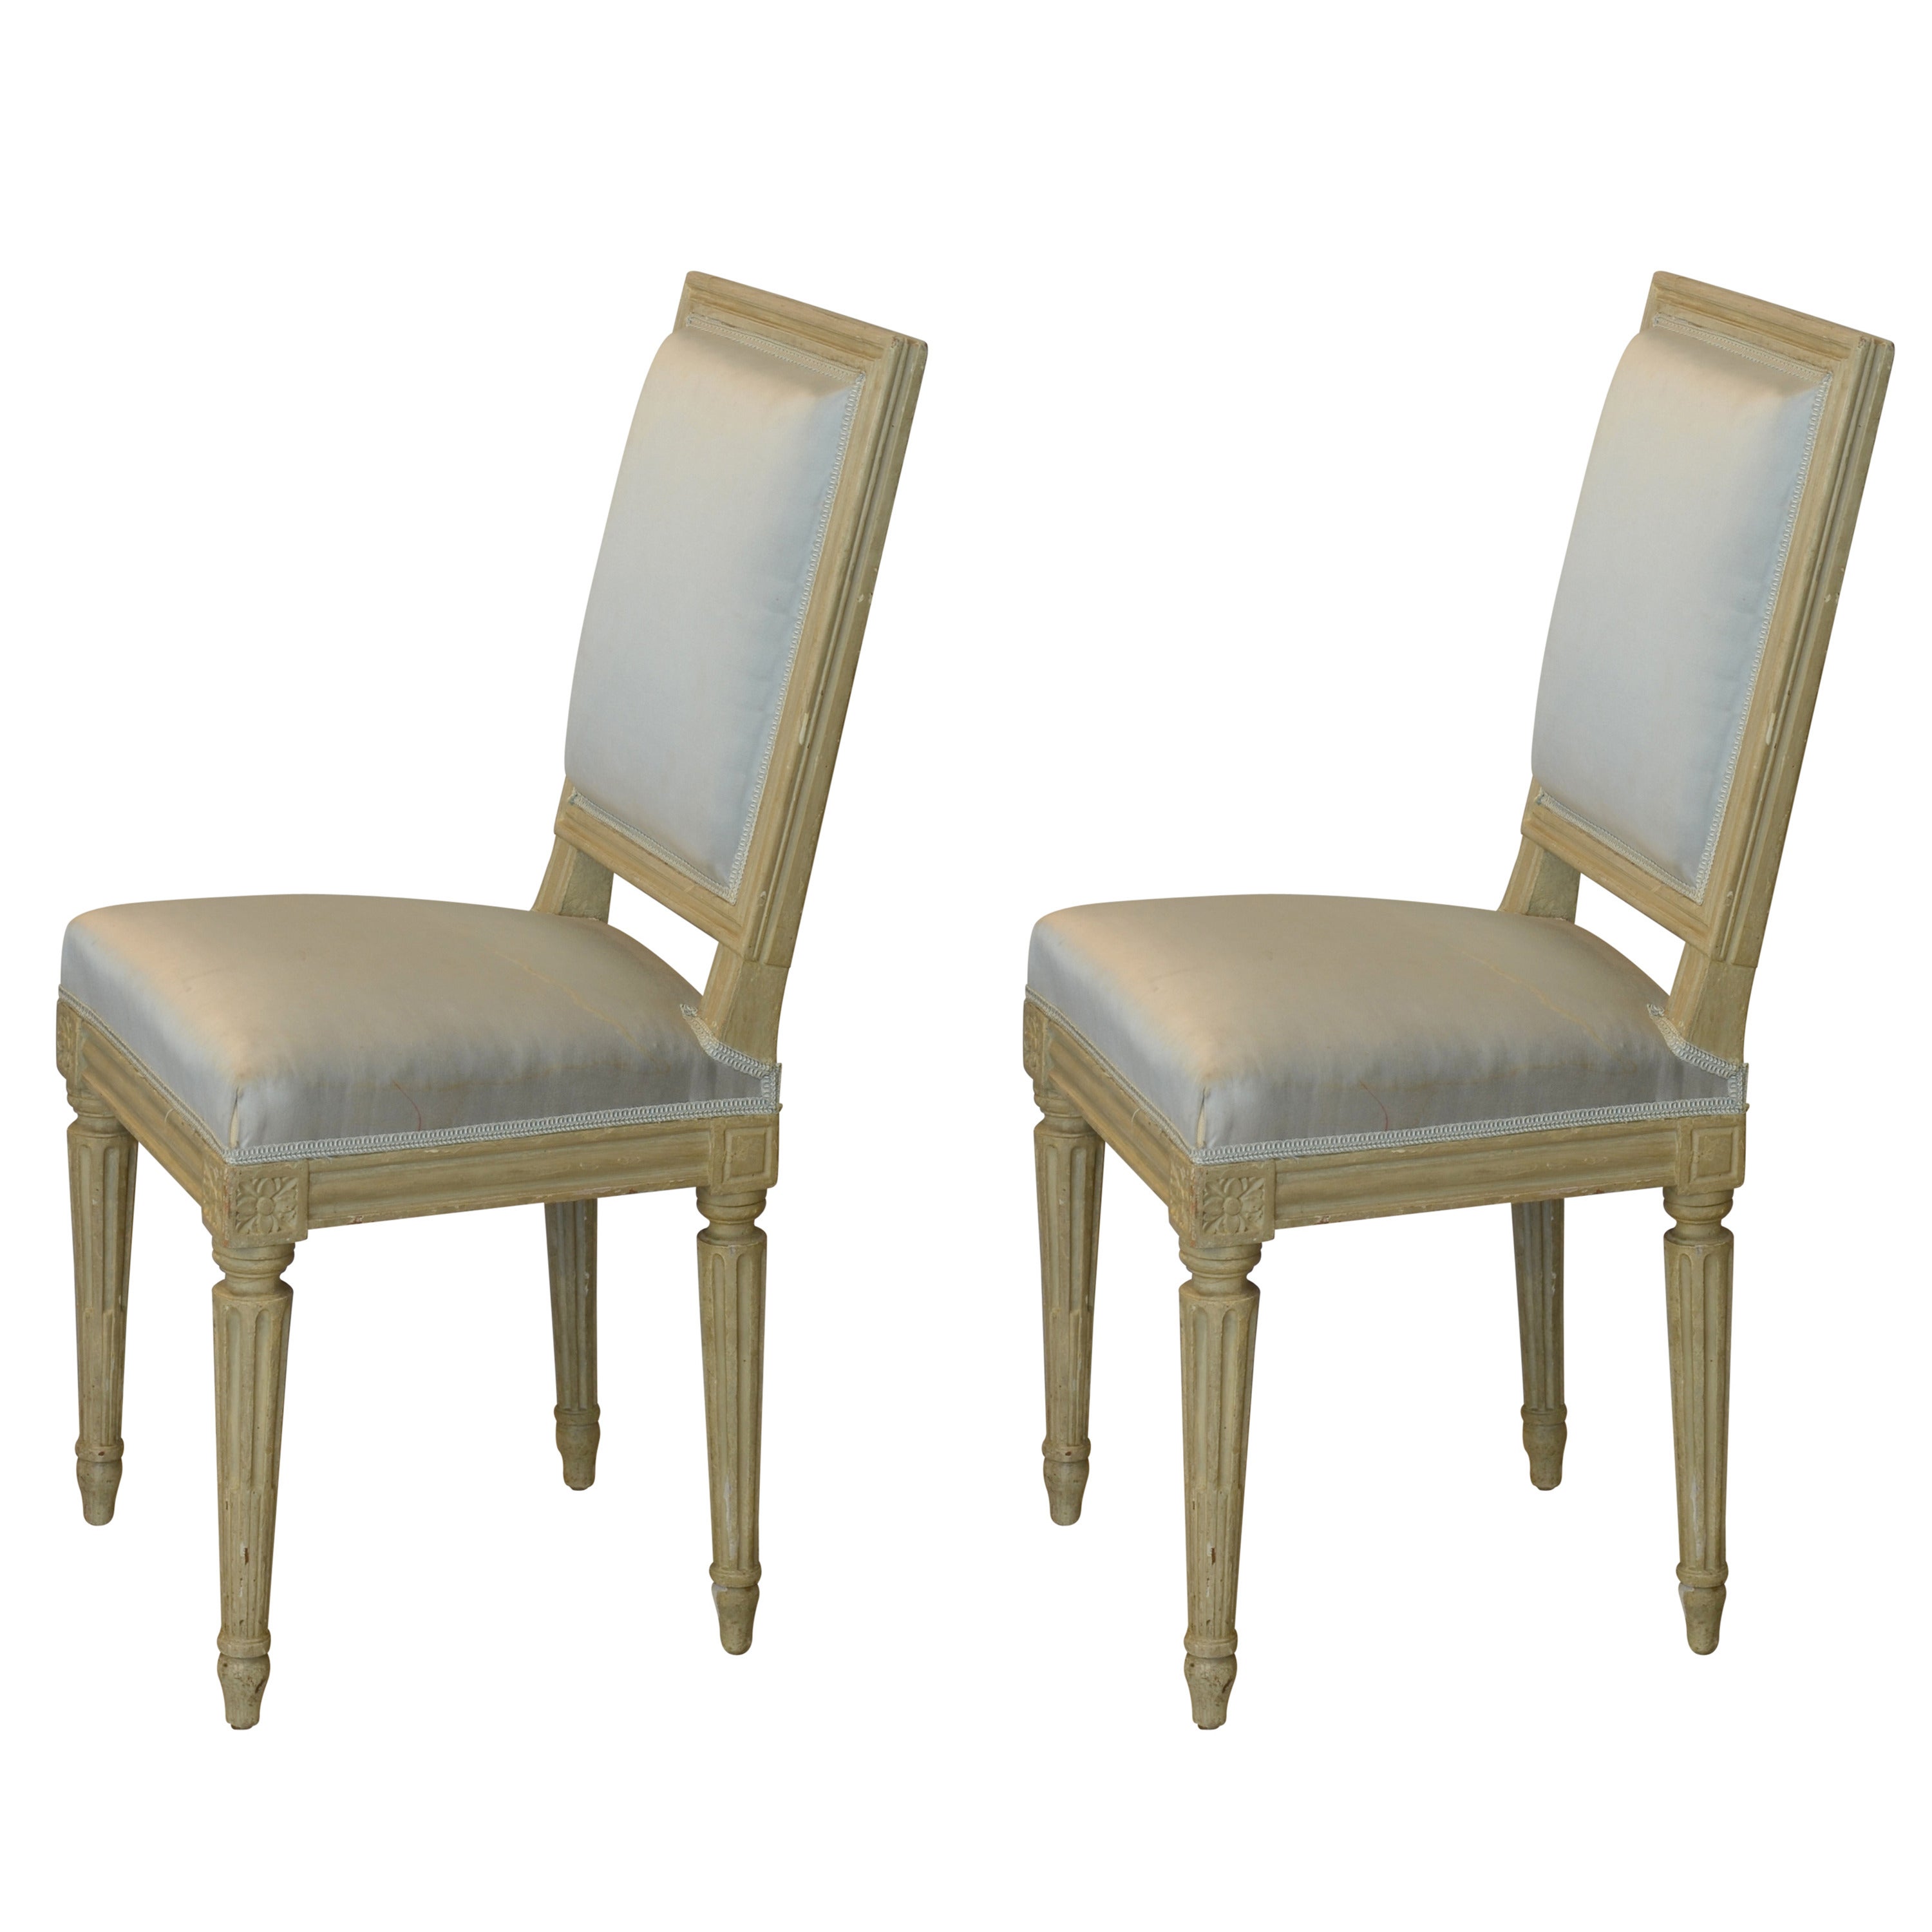 Pair of Louis XVI Style Side Chairs by Armand-Albert Rateau